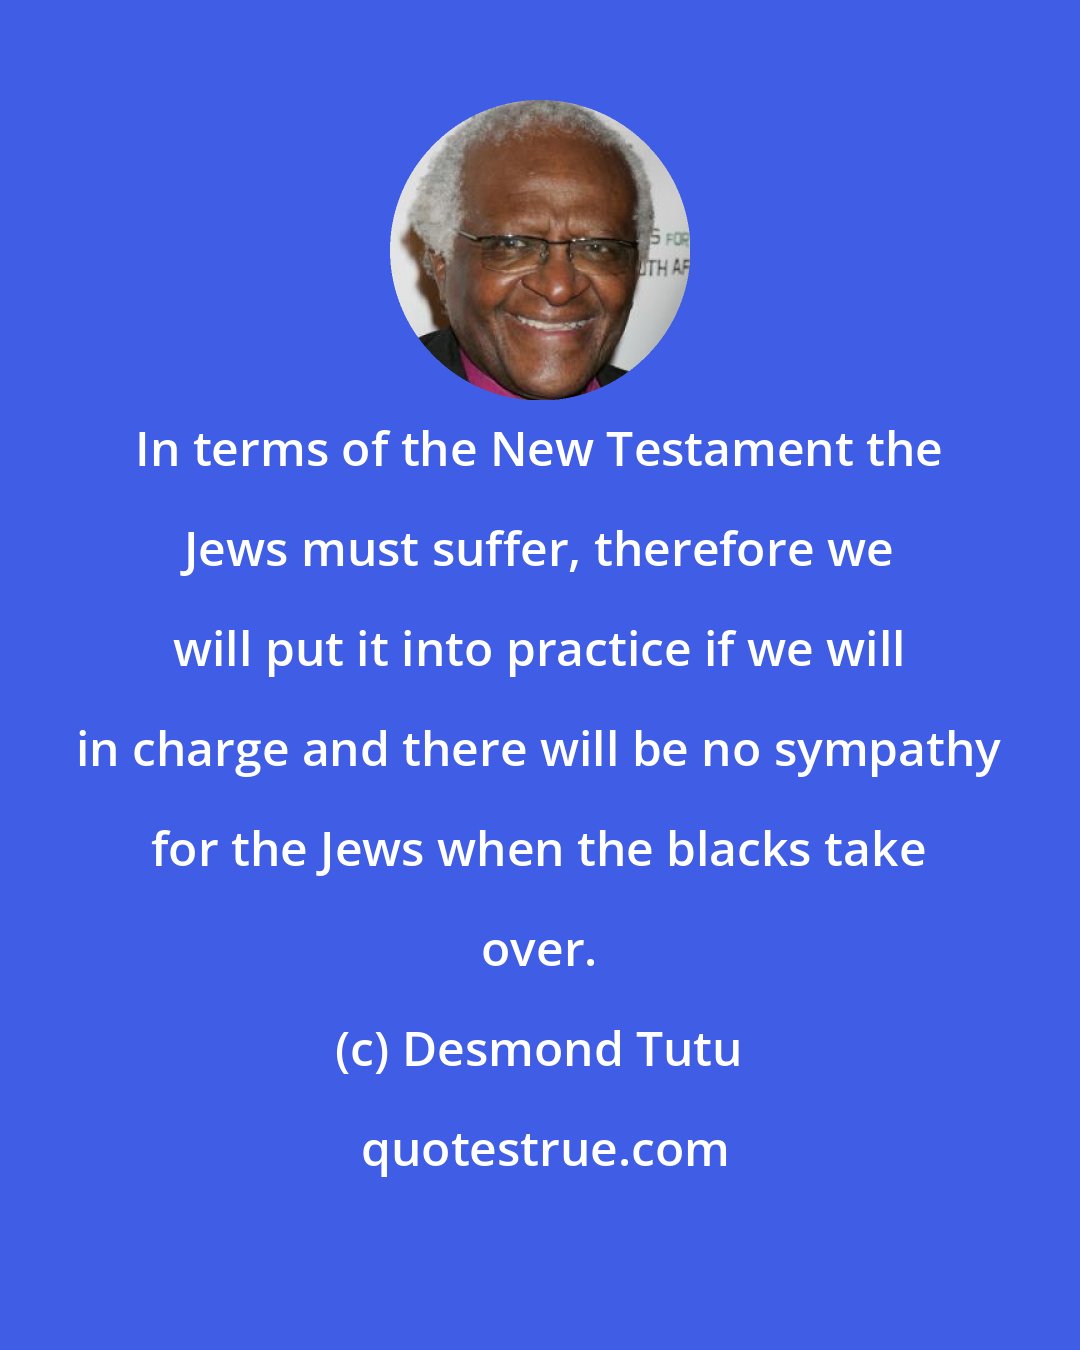 Desmond Tutu: In terms of the New Testament the Jews must suffer, therefore we will put it into practice if we will in charge and there will be no sympathy for the Jews when the blacks take over.